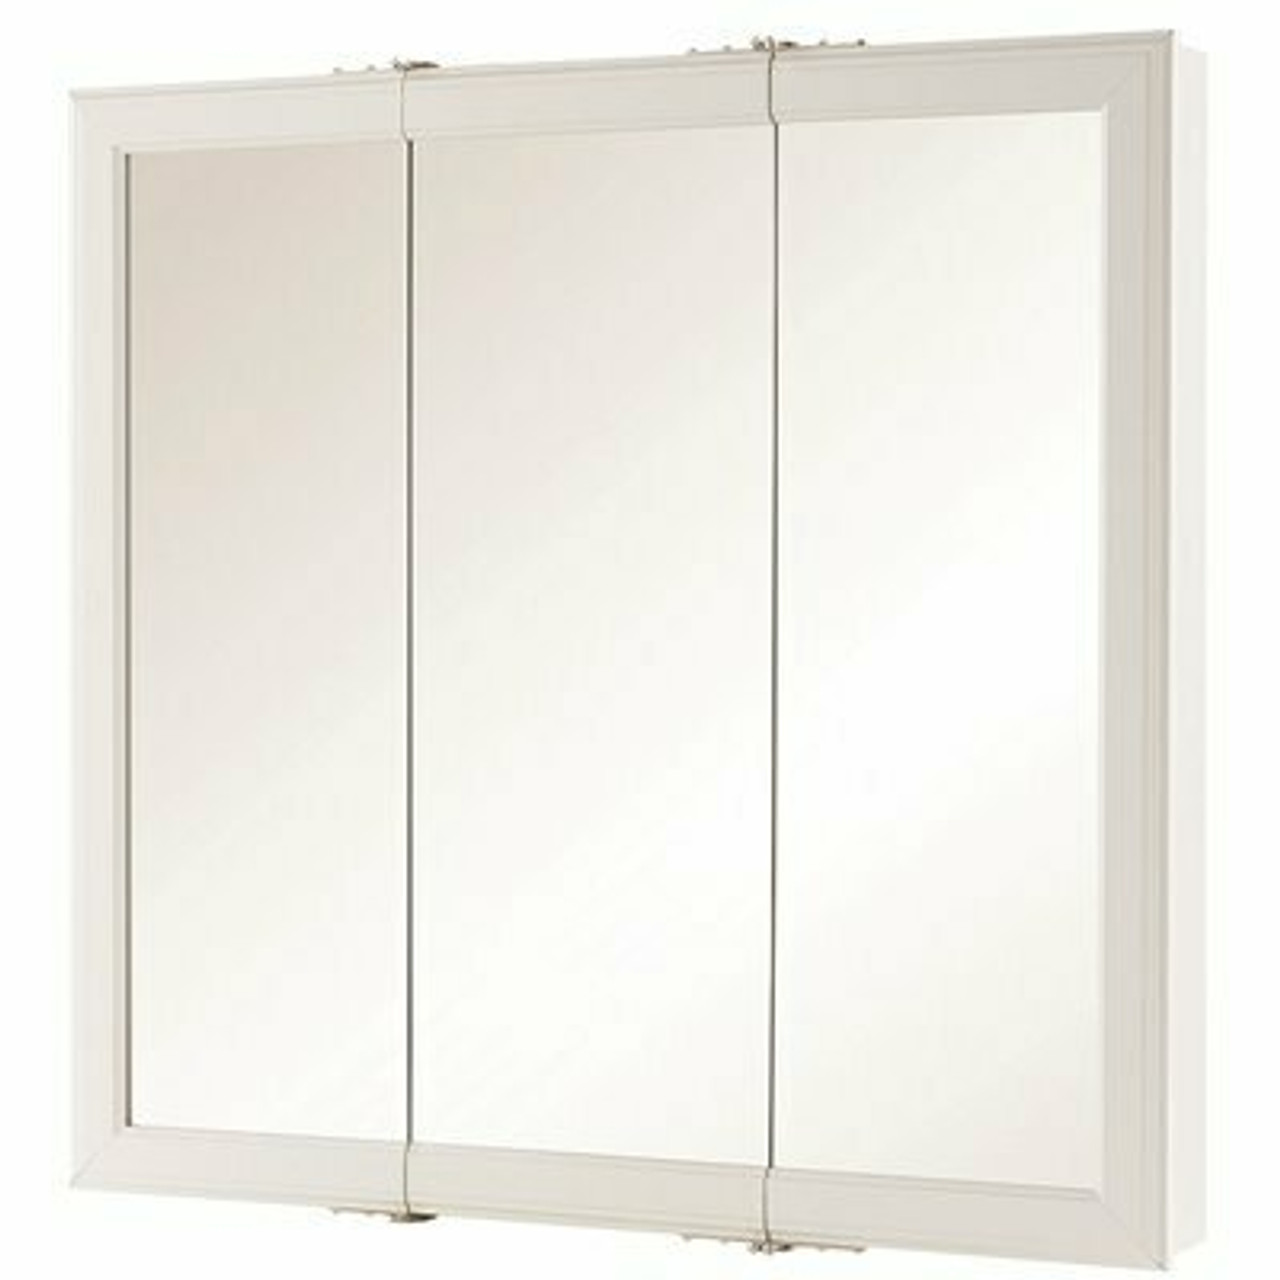 30 In. W X 29 In. H Fog Free Framed Surface-Mount Tri-View Bathroom Medicine Cabinet In White With Mirror